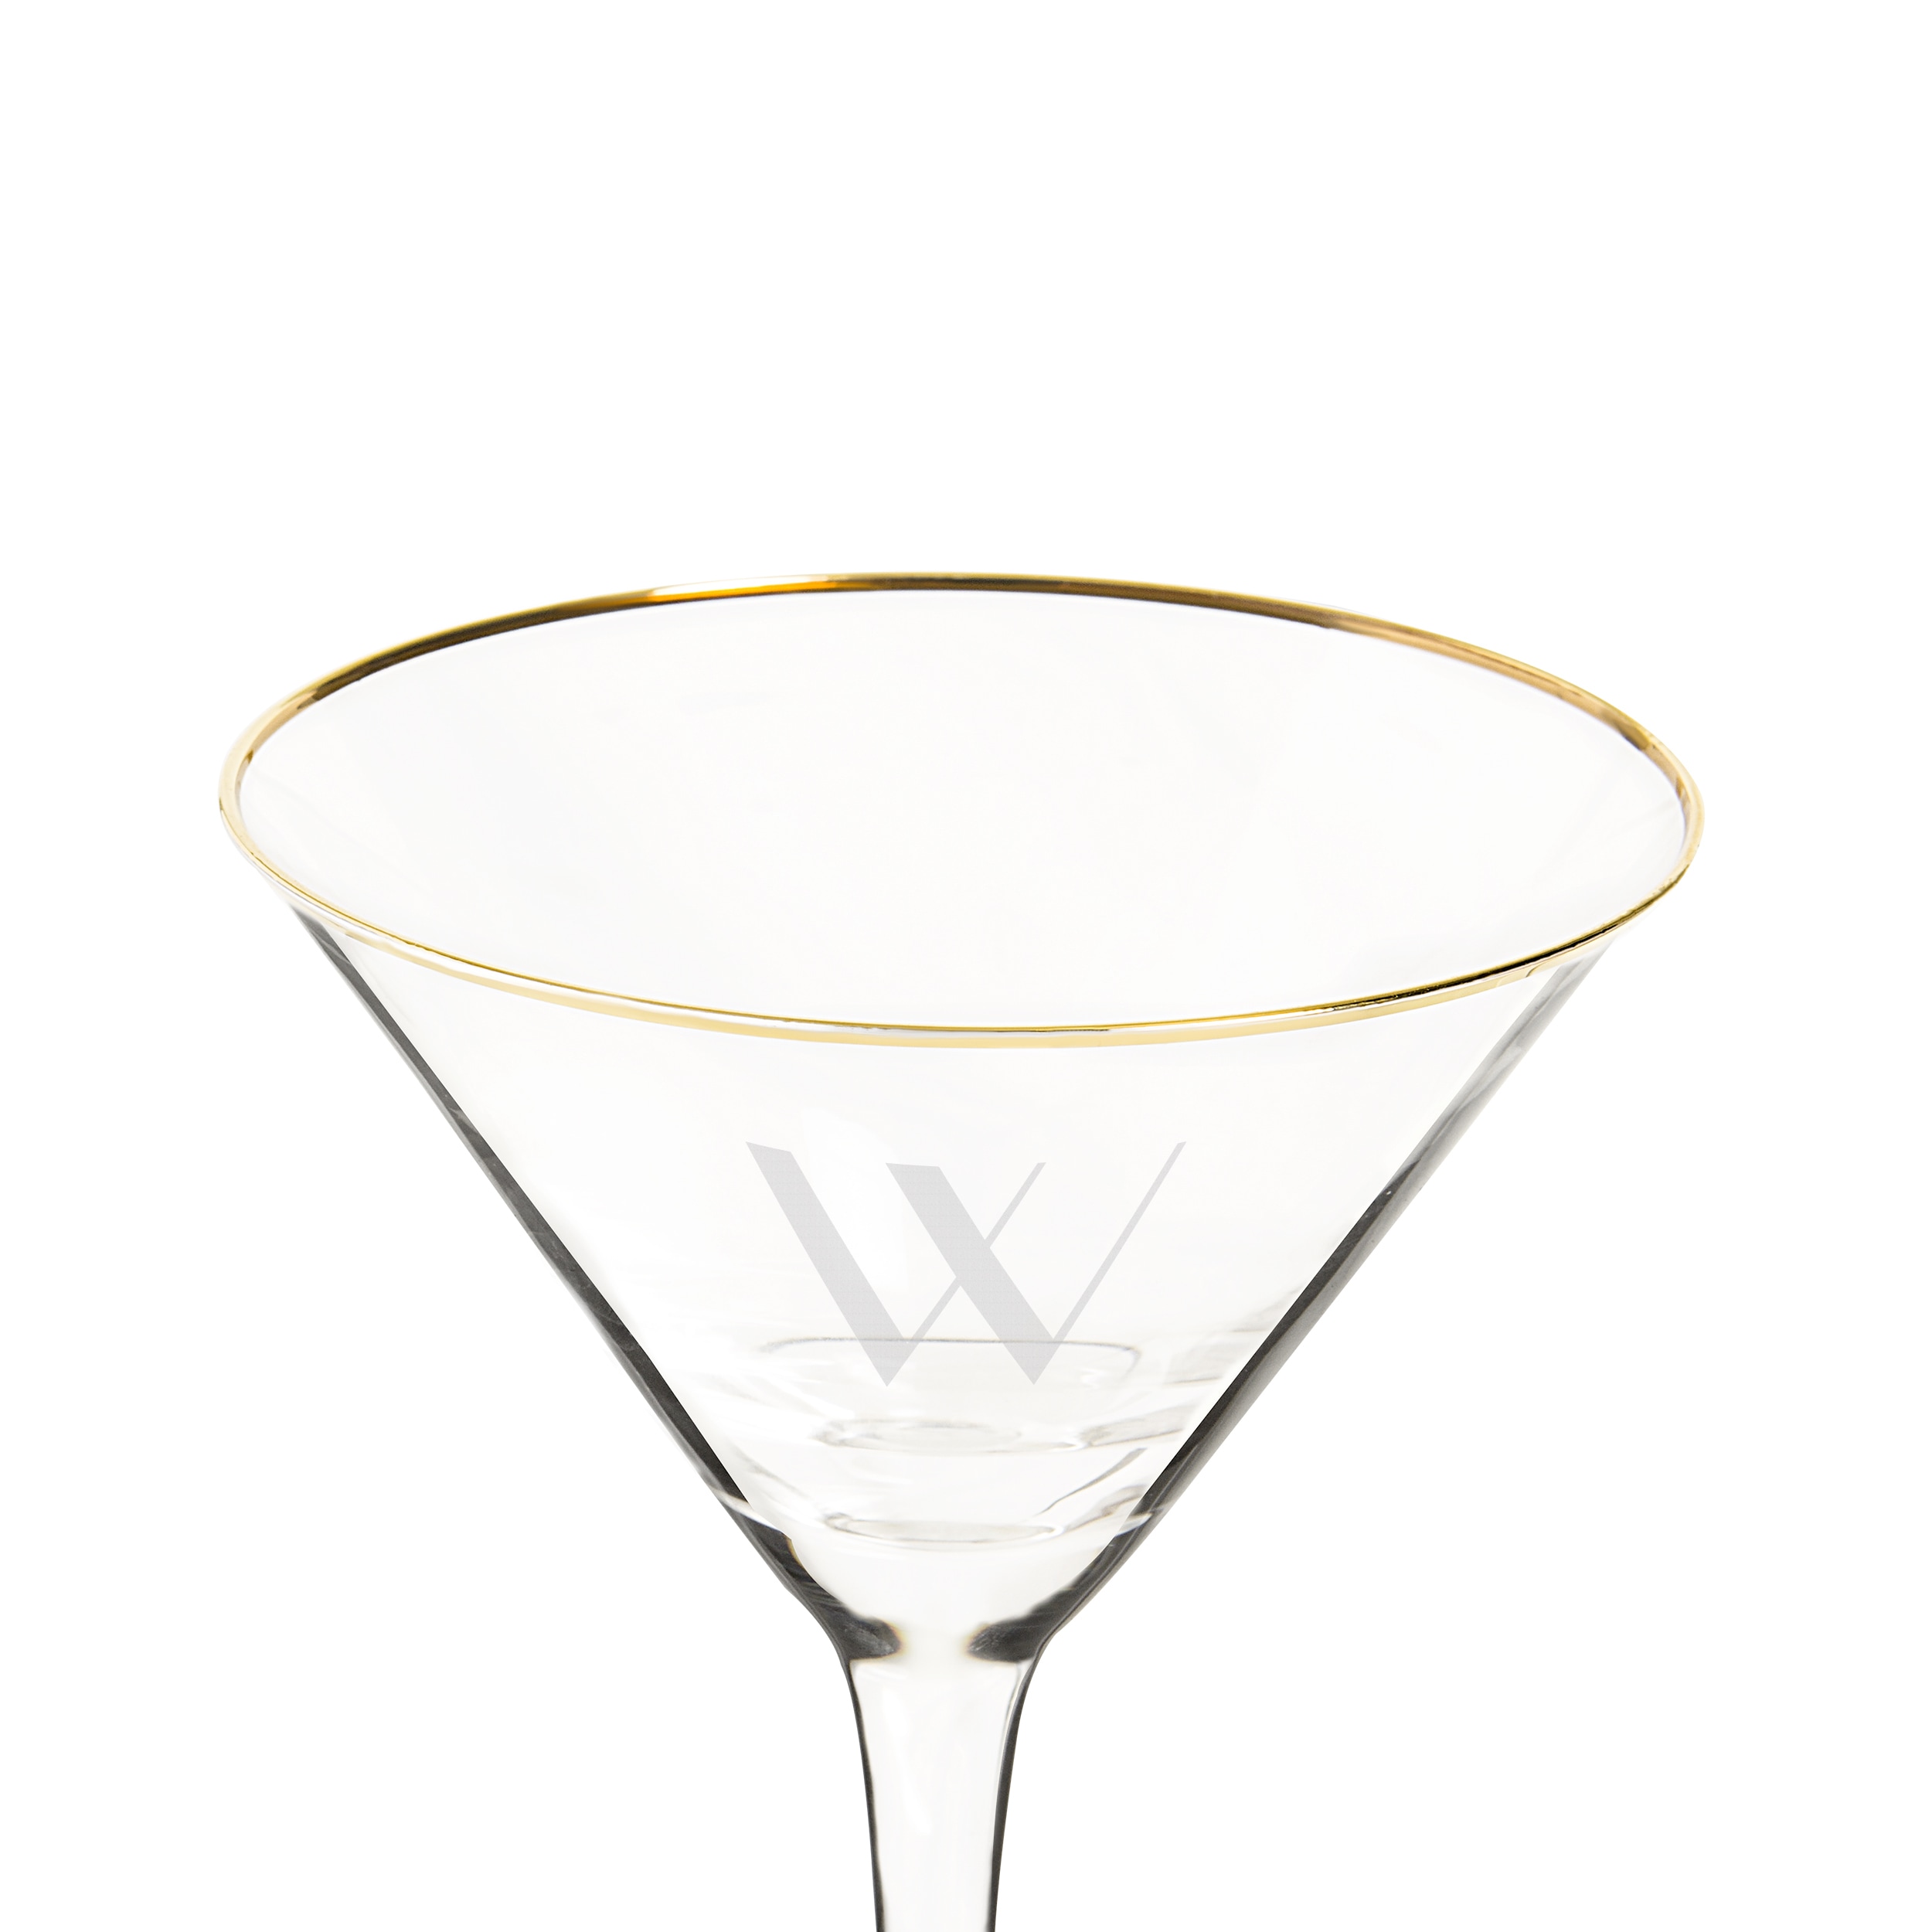 https://ak1.ostkcdn.com/images/products/16807027/Personalized-Gold-Cocktail-Shaker-Set-with-Gold-Rim-Martini-Glasses-cbad8183-9d39-4854-aa41-98fa05f36baf.jpg